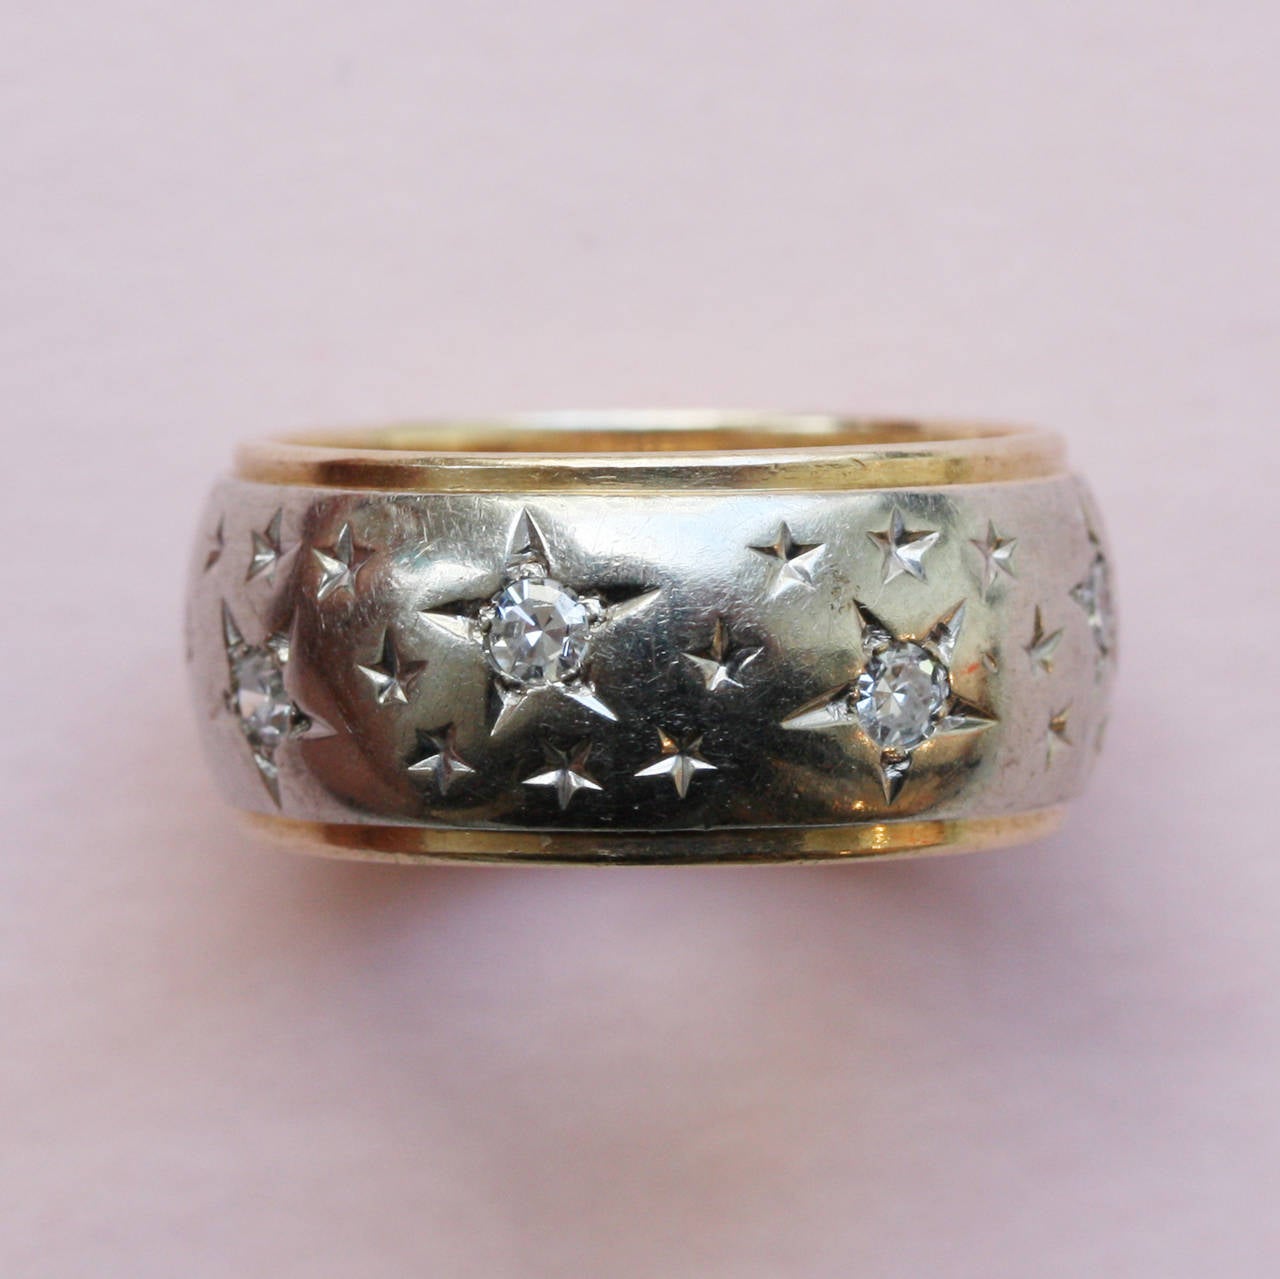 A 14 carat white and yellow gold band ring set with 8 single cut diamonds (total circa 0.5 carats) with engravings that make them stars, USA, 1959.

weight: 8.2 grams
ring size: 16.25 mm. 5 3/4 US.